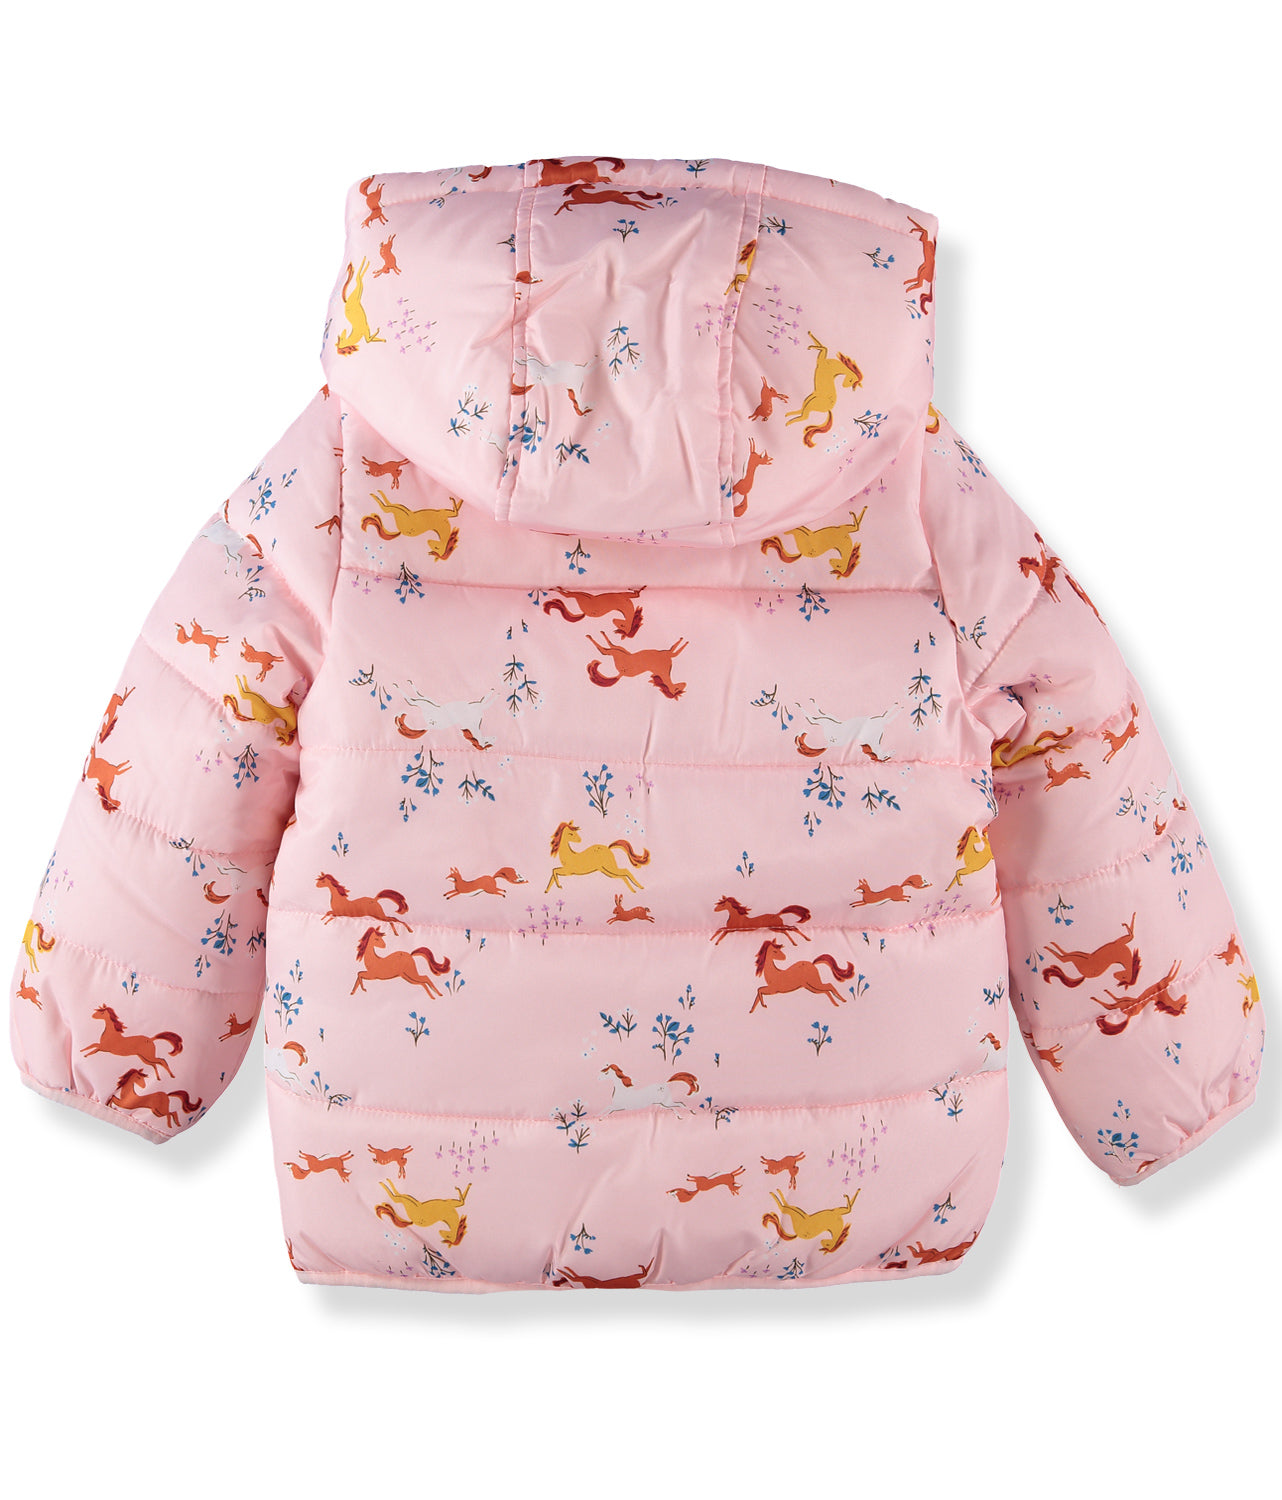 Carters Girls 2T-4T Floral Puffer Jacket